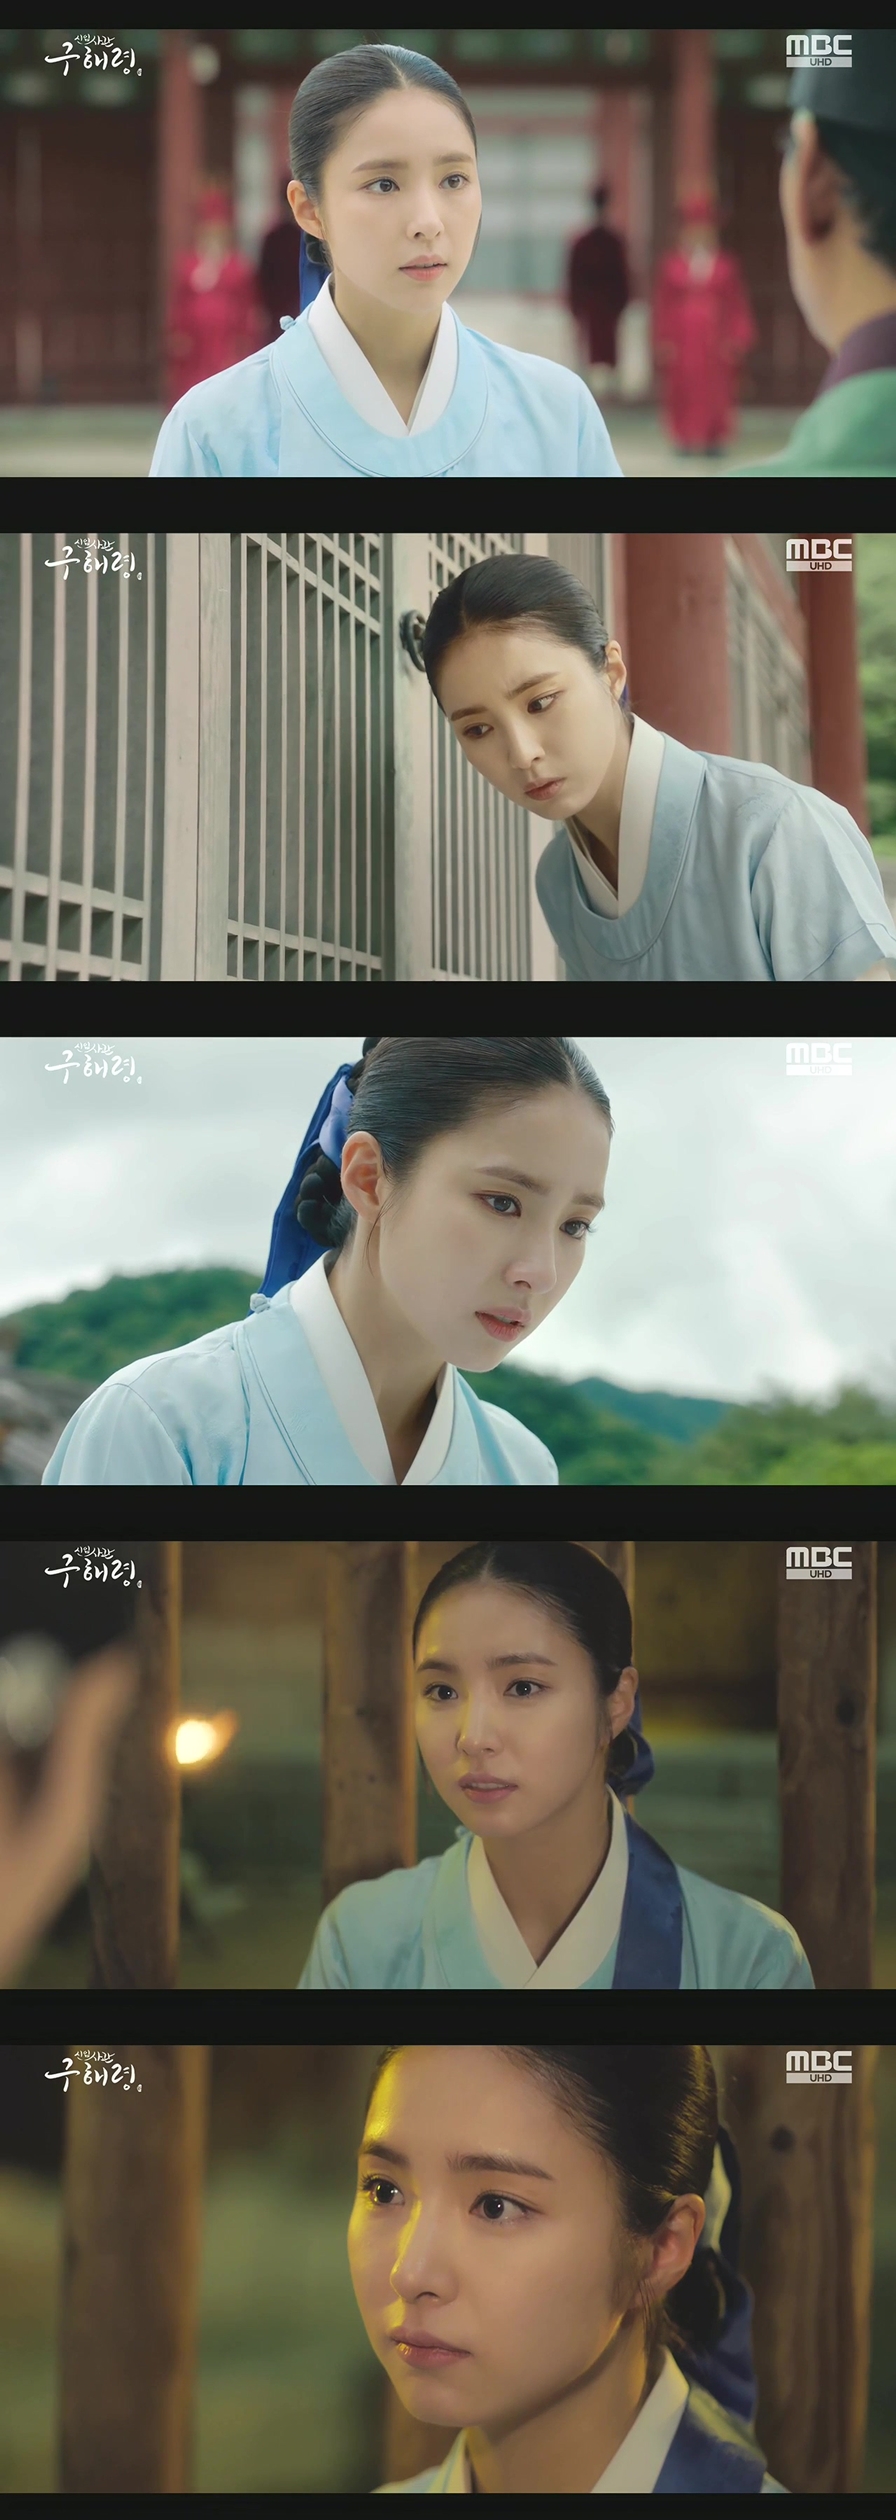 The new employee, Na Hae-ryung, once again showed a brilliant value.The MBC drama Na Hae-ryung is clearly responsible for many peoples Wednesdays and Thursdays.The most prominent actor is Shin Se-kyung, who leads the story completely.Shin Se-kyung is in the midst of the first woman (Na Hae-ryung) to plant precious changes in Joseon, where Sung Confucianism is deeply rooted.Shin Se-kyungs Feeling Stimulation Acting, which continues to praise every day, shone last night.In the 21-22 session of the new cadet, Shin Se-kyung was the old Na Hae-ryung itself.From a cadet with a clear sense of calling to a woman who is not subject to trembling excitement. She delicately depicted various aspects of the character and gave an overwhelming immersion.Na Hae-ryung (Shin Se-kyung Boone), who was ordered to enter the preliminaries of the cast.Despite the disallowance of merchant ships and palaces that were not allowed to enter the university, Na Hae-ryungs burning sense of mission was not easily turned off.In the end, he chose the rules, not the entrance examination, and he was in a crisis of his life.Na Hae-ryung was trapped in Oksa because of the violation of the name, which caused explosive tension.Even at the moment of fear, the remorse that was held in both hands until the end was the point that Na Hae-ryung was seriously working as a cadet.Since then, the name has been collected by the strike of the senior Min Woo-won (Lee Ji-hoon), the strike of the officers of the Yemun-gwan, and the Hogok-kwon of Sungkyunkwans larvae, and Na Hae-ryung was also released from Oksa.Viewers who watched this said that they breathed out a sigh of relief.In addition, Na Hae-ryung, who fell in love, conveyed a heartbeat.When I saw Irim (Cha Eun-woo), who came to Oksa, there was an undesirable joy in words, and the active appearance of kissing the ball of Irim, which was regrettable because of the unintentional obstruction of Sambo (Seongjiru) filled the room with pink trembling.As the romance with Irim began in earnest, I wonder what the name of Na Hae-ryung, which has decorated the intense ending, will be at its peak.iMBC  Photos